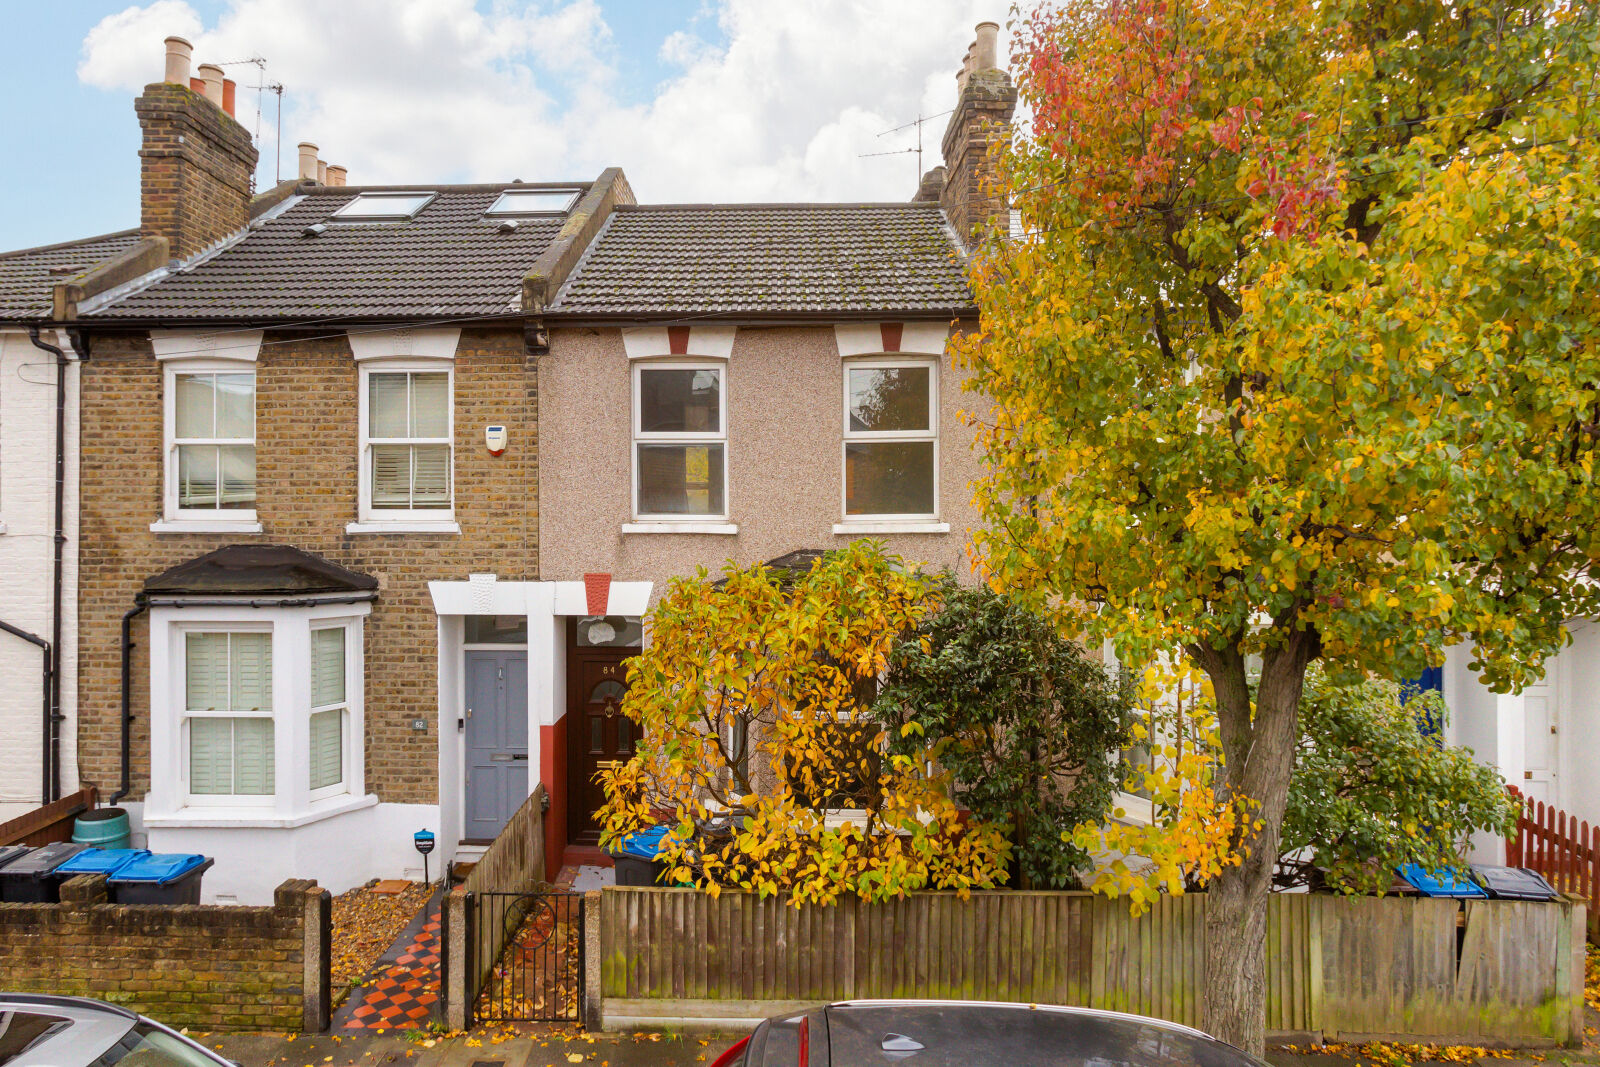 3 bedroom mid terraced house to rent, Available now Pelham Road, SW19, main image